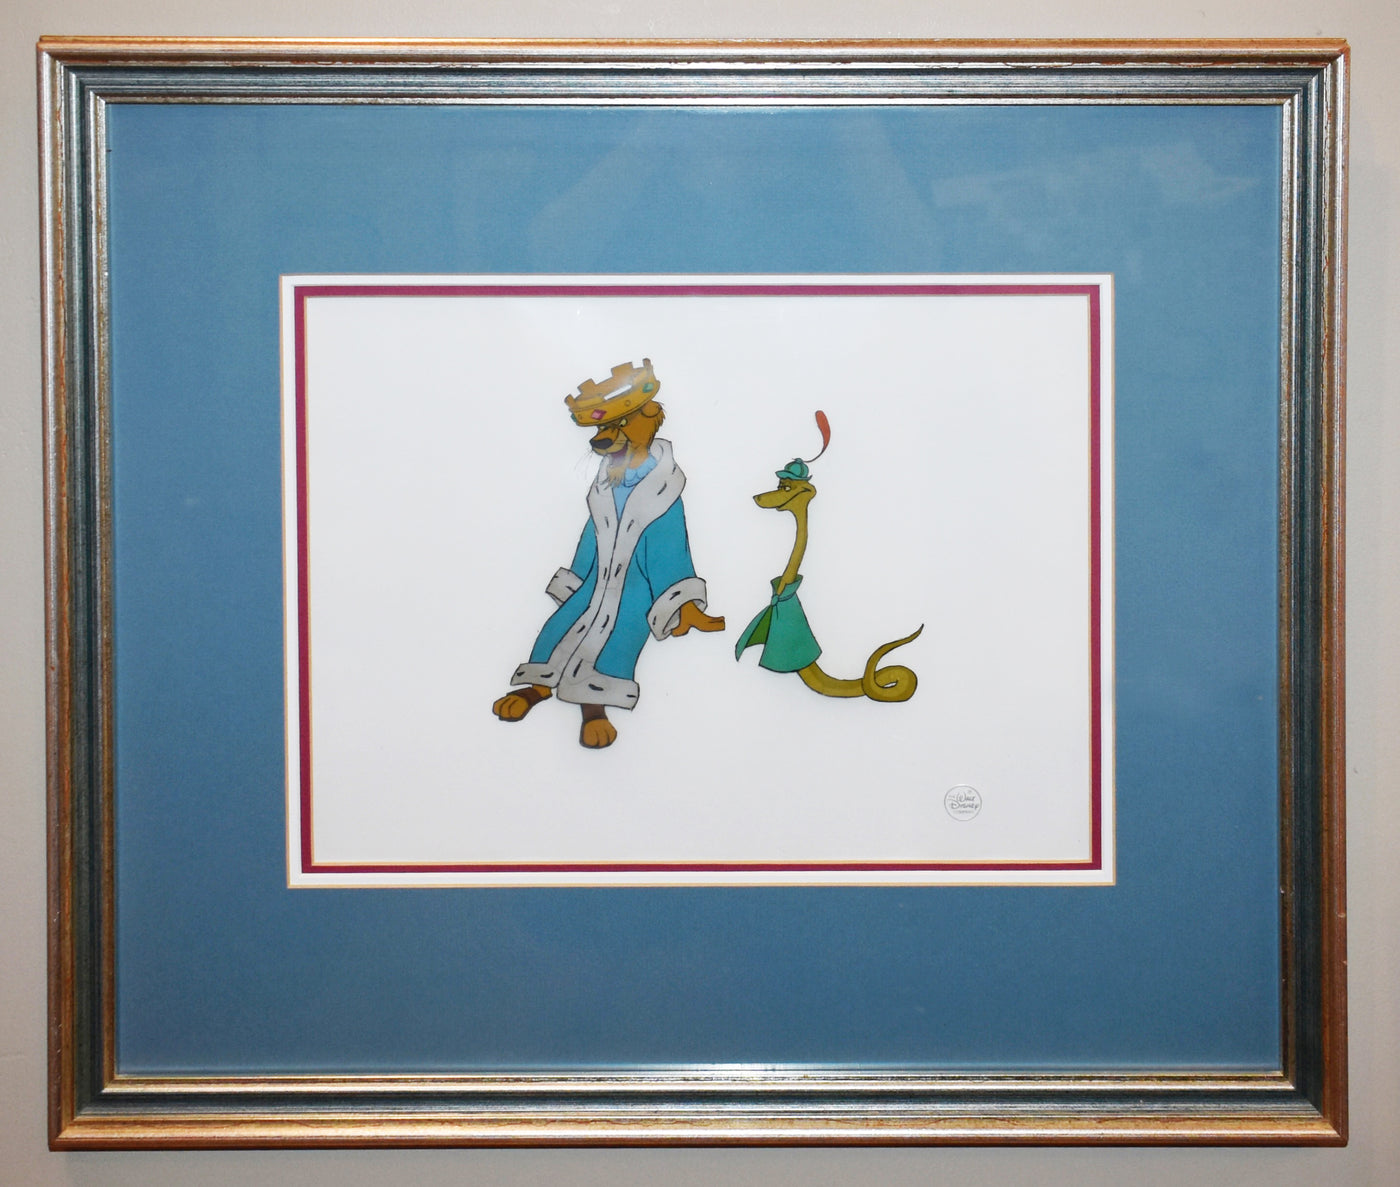 Original Disney Production Cel from Robin Hood featuring Prince John and Sir Hiss